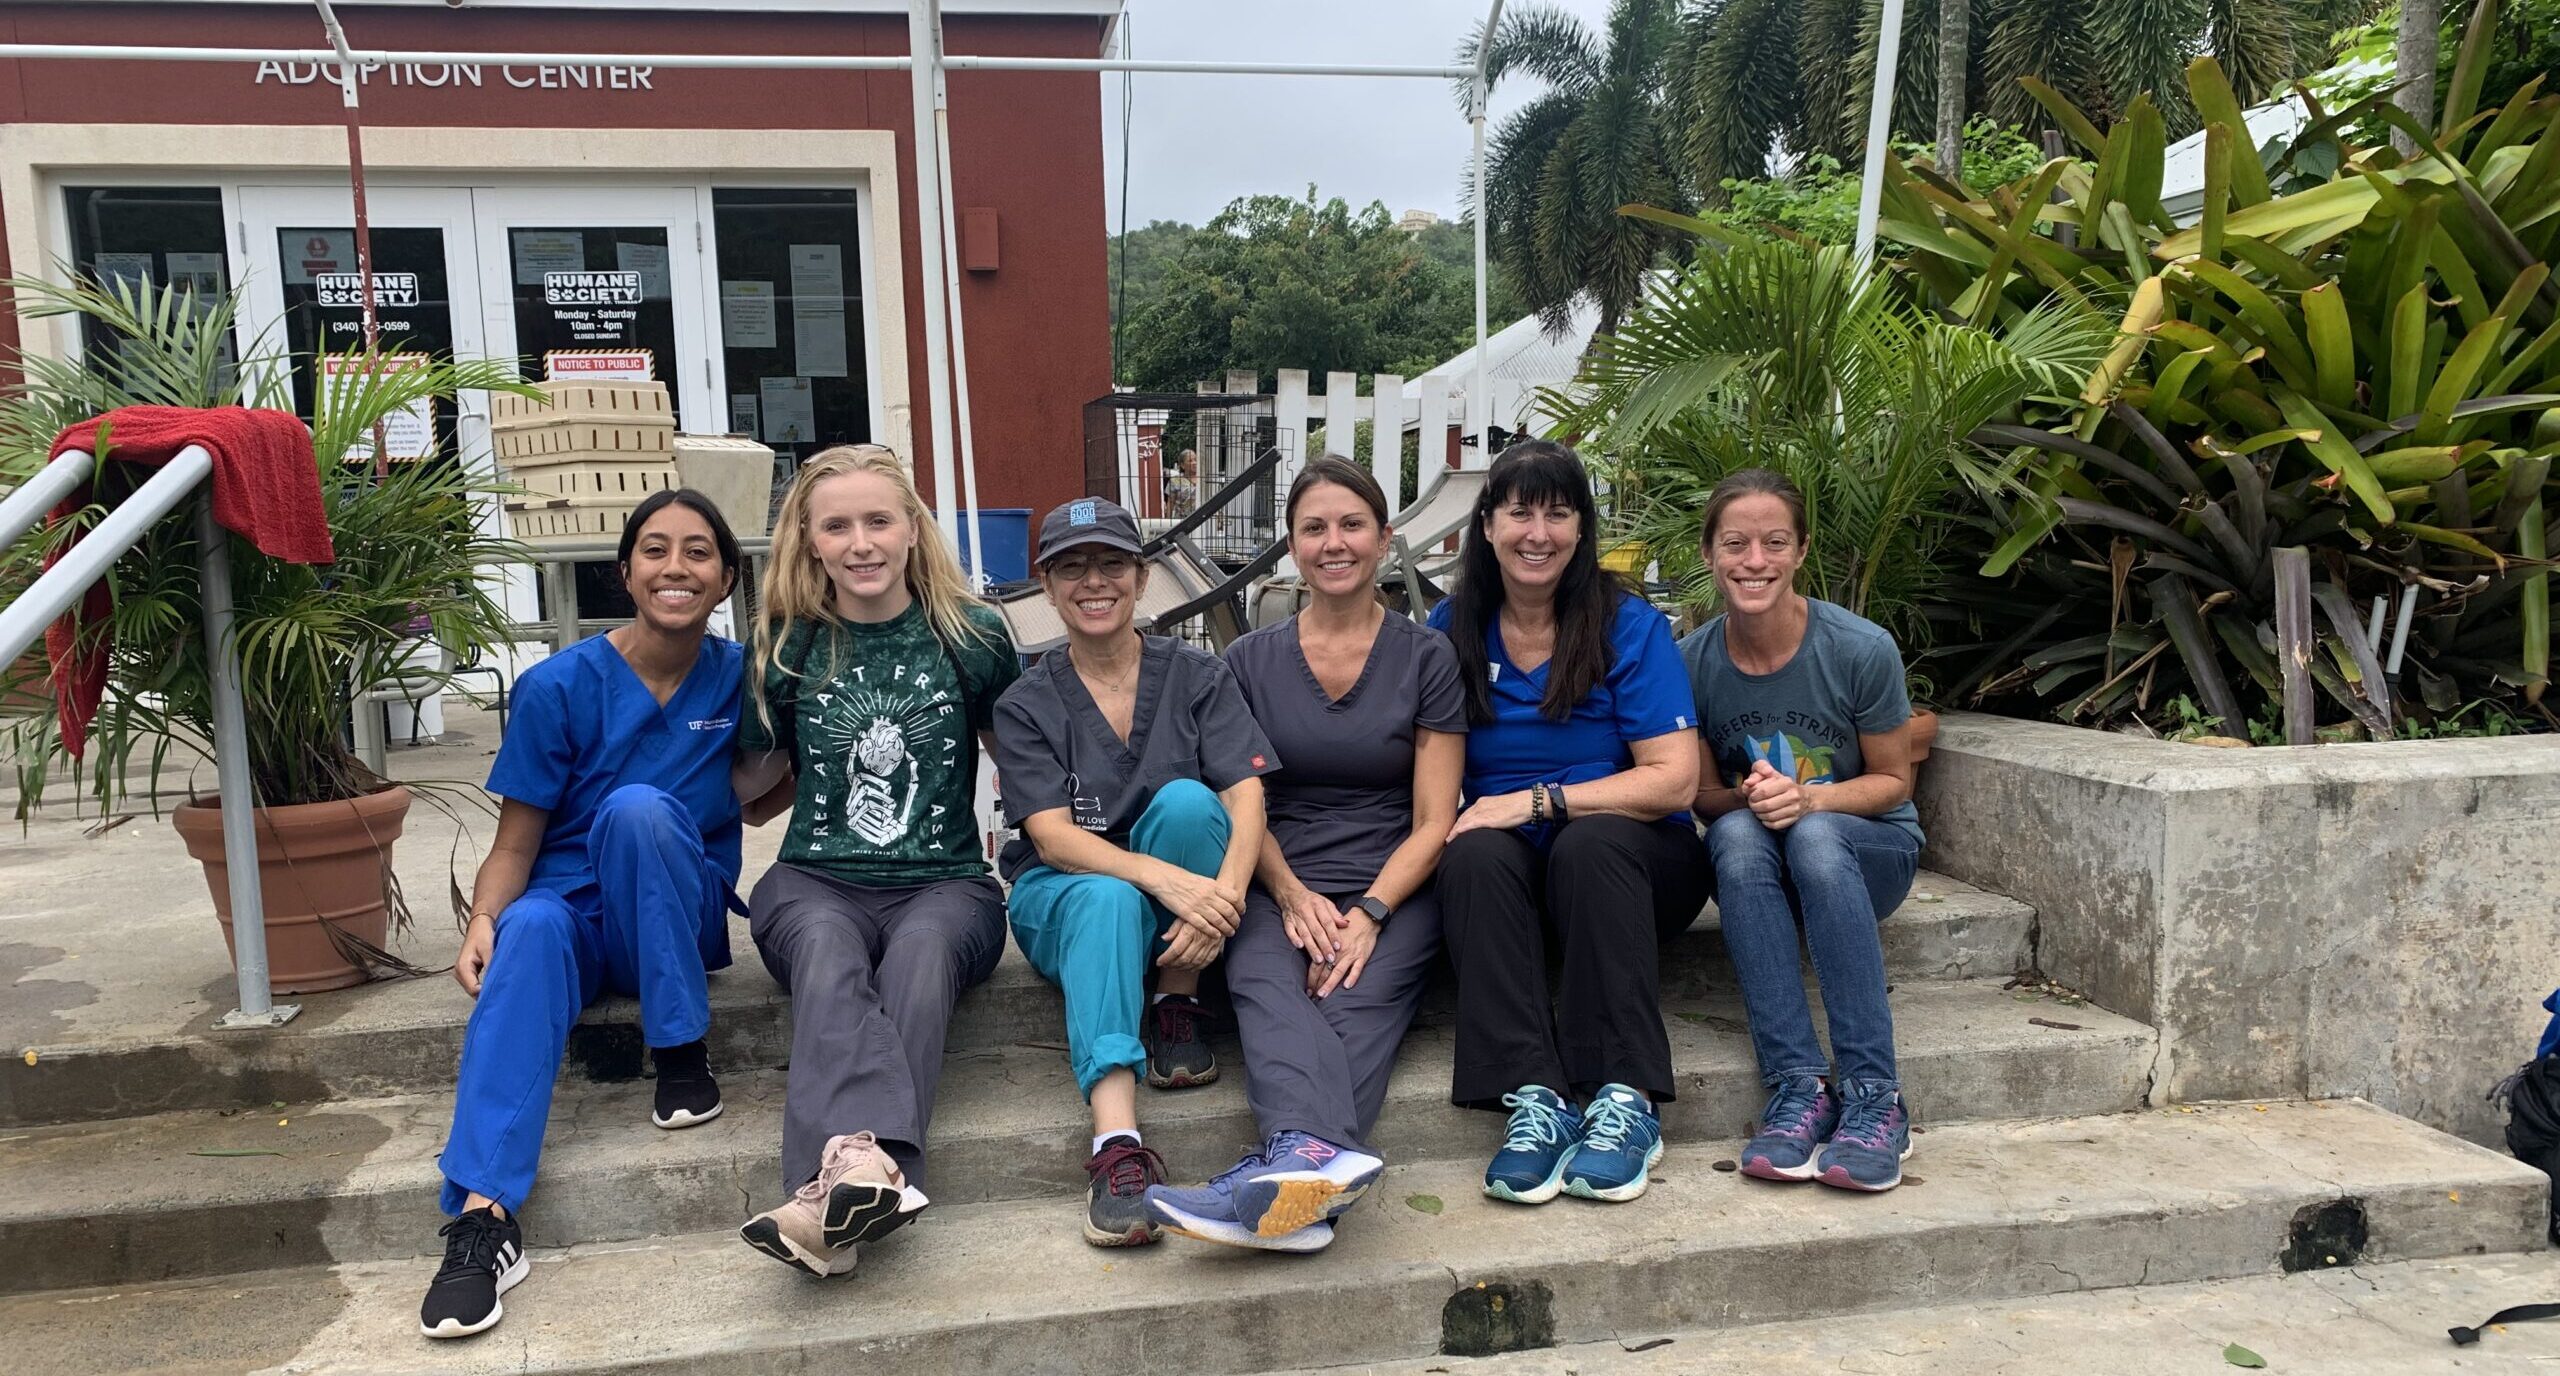 The Team, from left, Dr. Avnee Mistry, Nora Davern, Dr. Sara Pizano, Dr. Kim Sanders, Cameron Moore, and Dr. Andrea Peda. Not pictured is Dr. Hannah Coenen, who had to cut her trip short due to an emergency. (Photo courtesy of the Humane Society of St. Thomas)